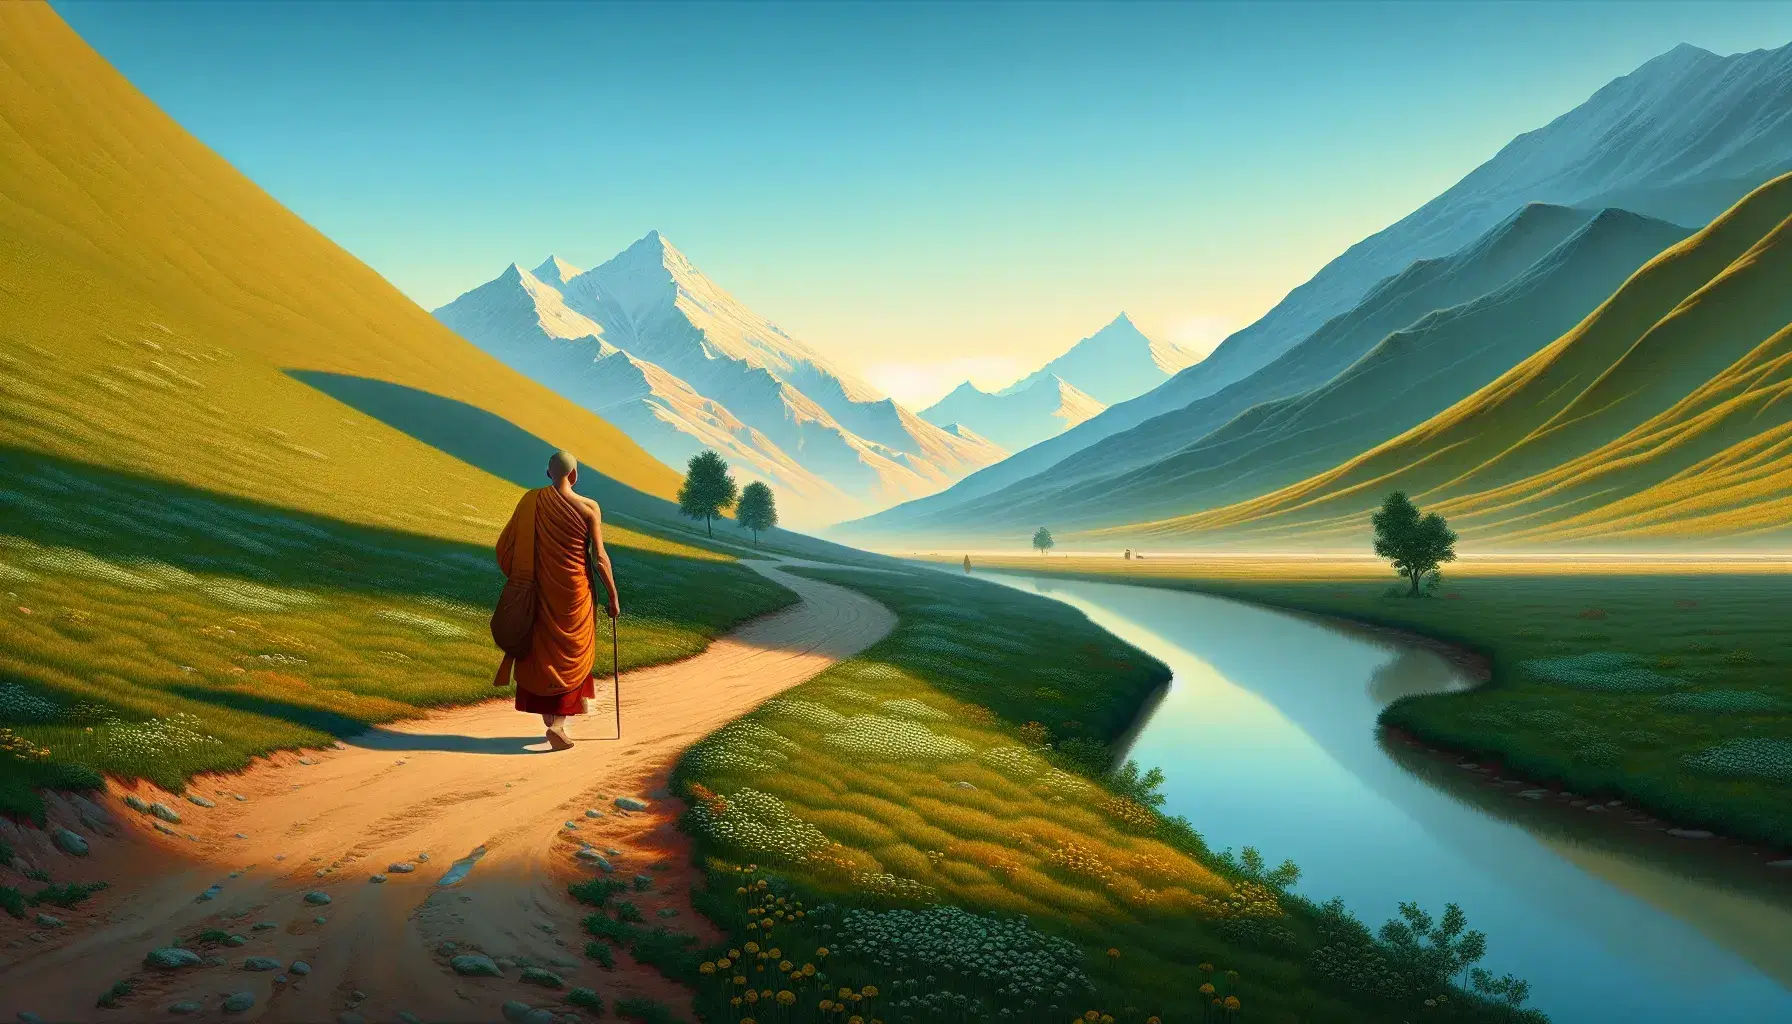 Buddhist monk in saffron robes walking on a path by a river, with snow-capped mountains in the distance and a clear blue sky above.